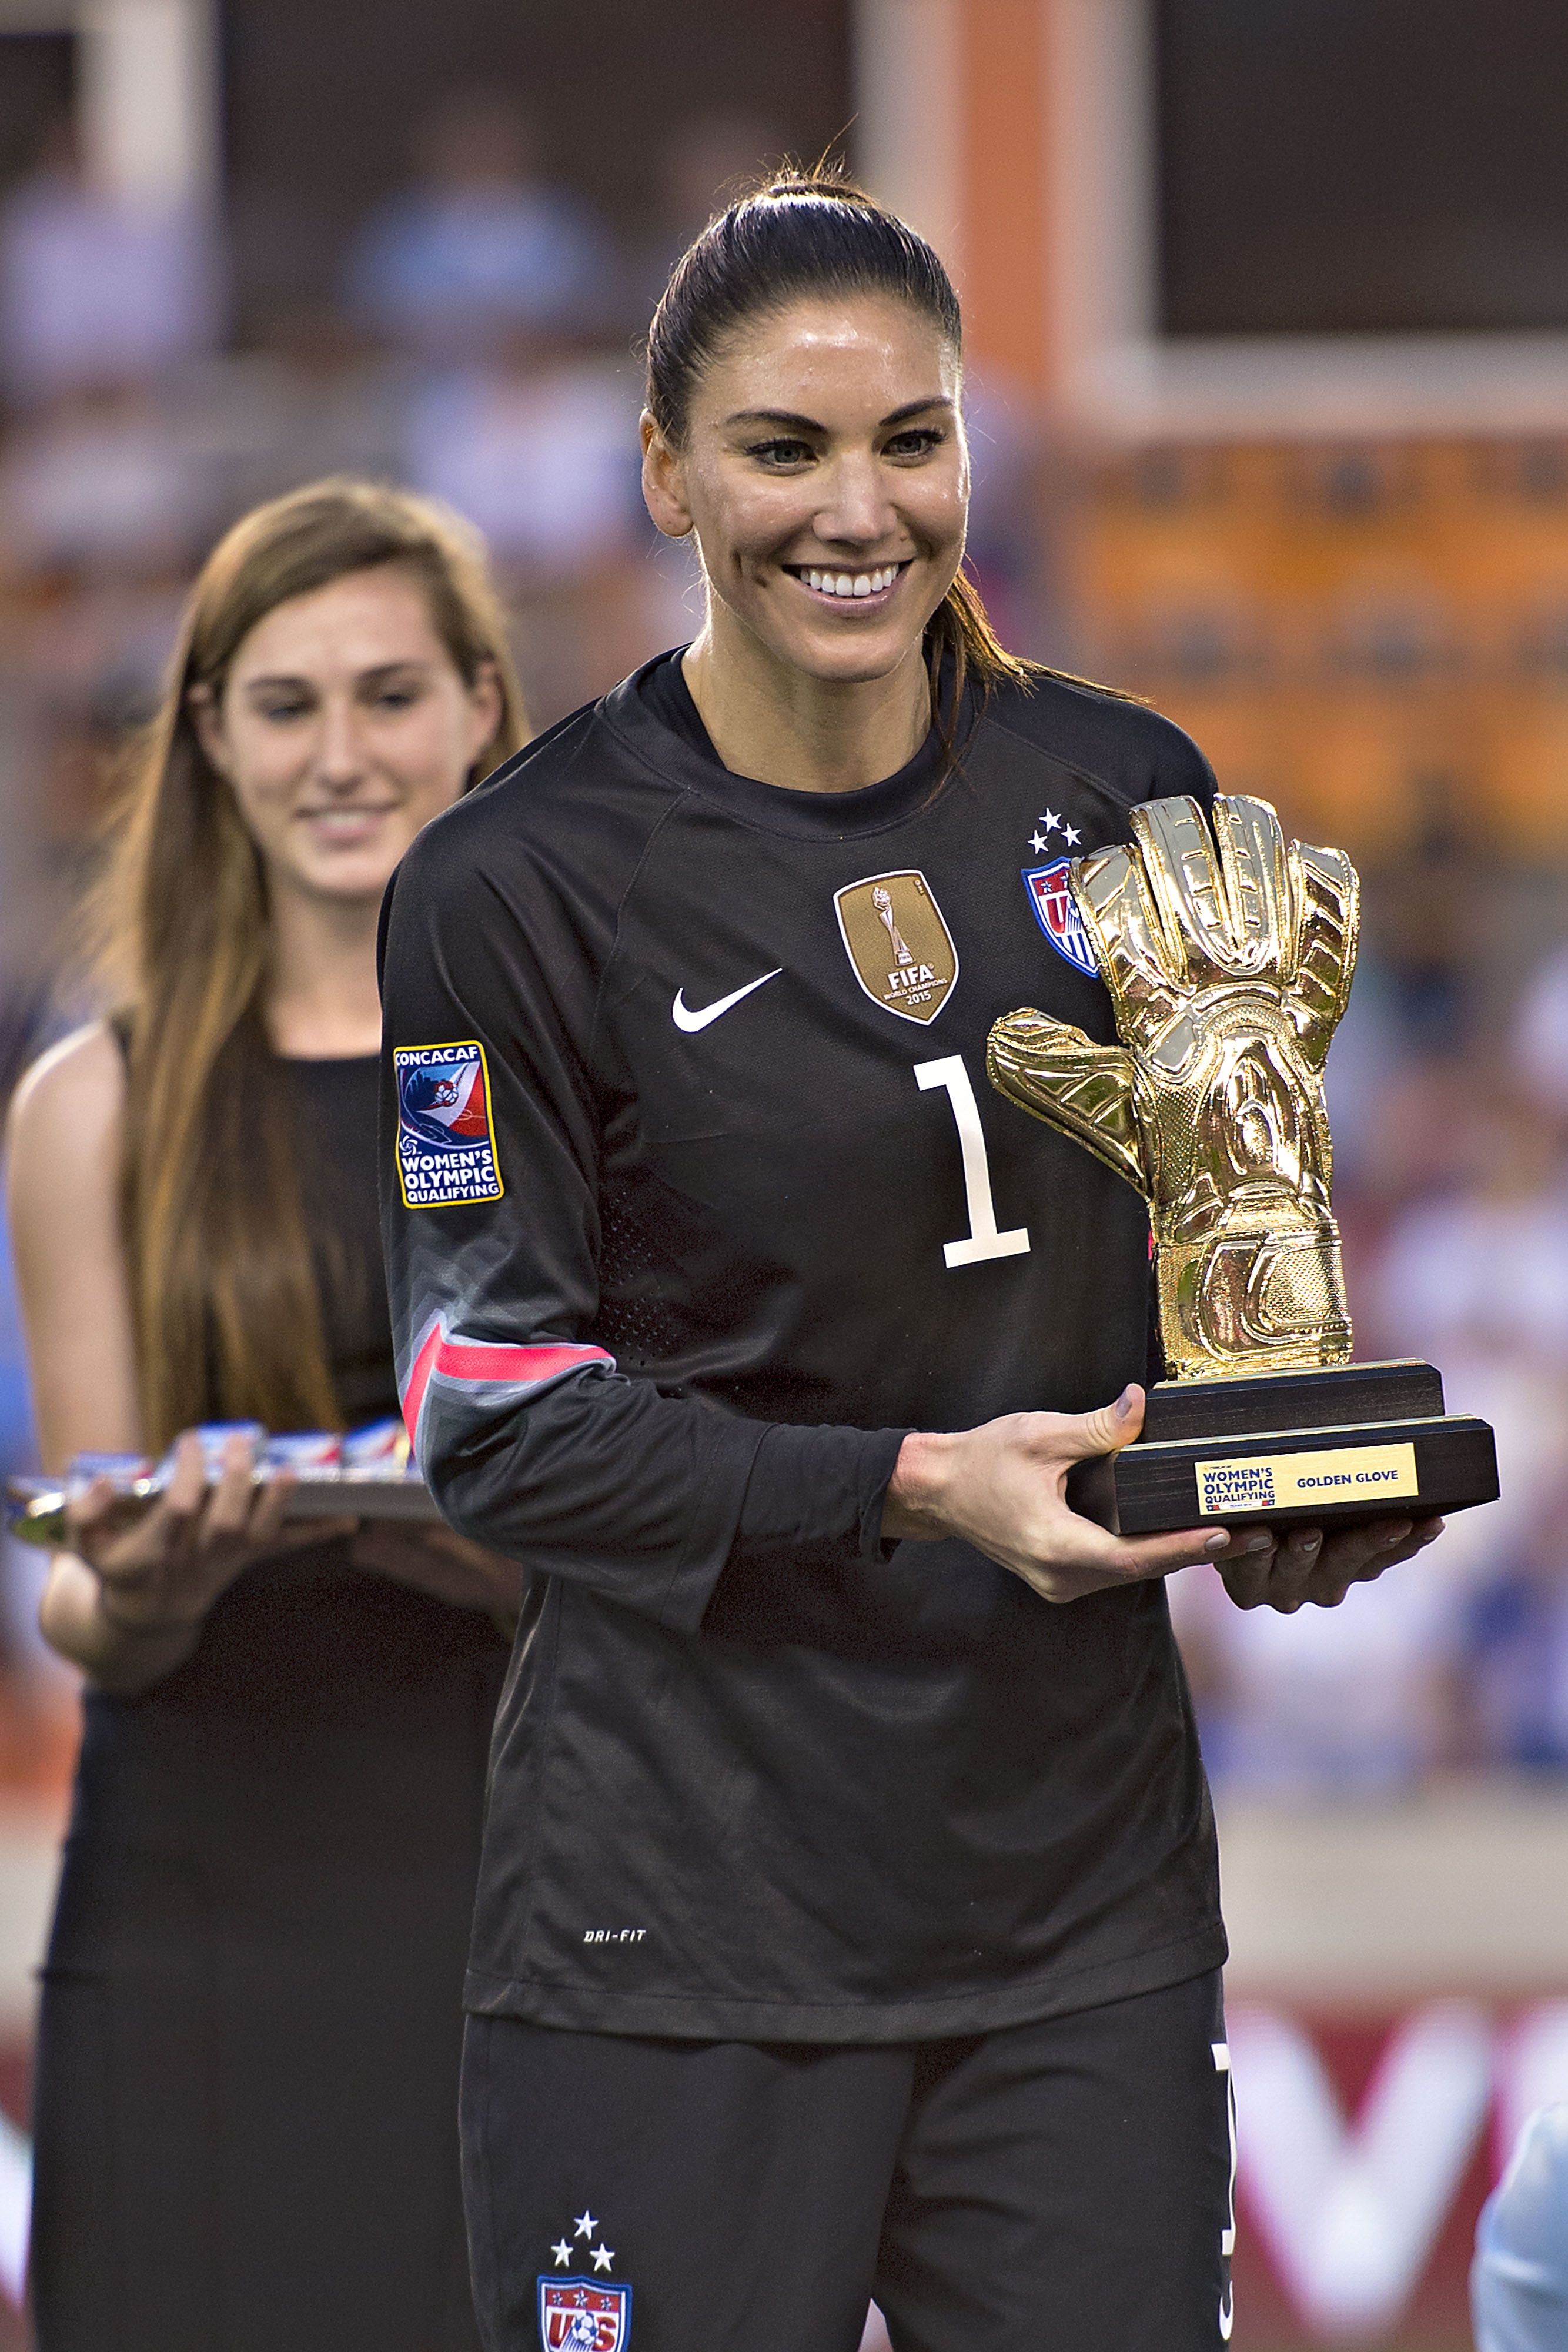 Of hope solo photos 15 Athletes